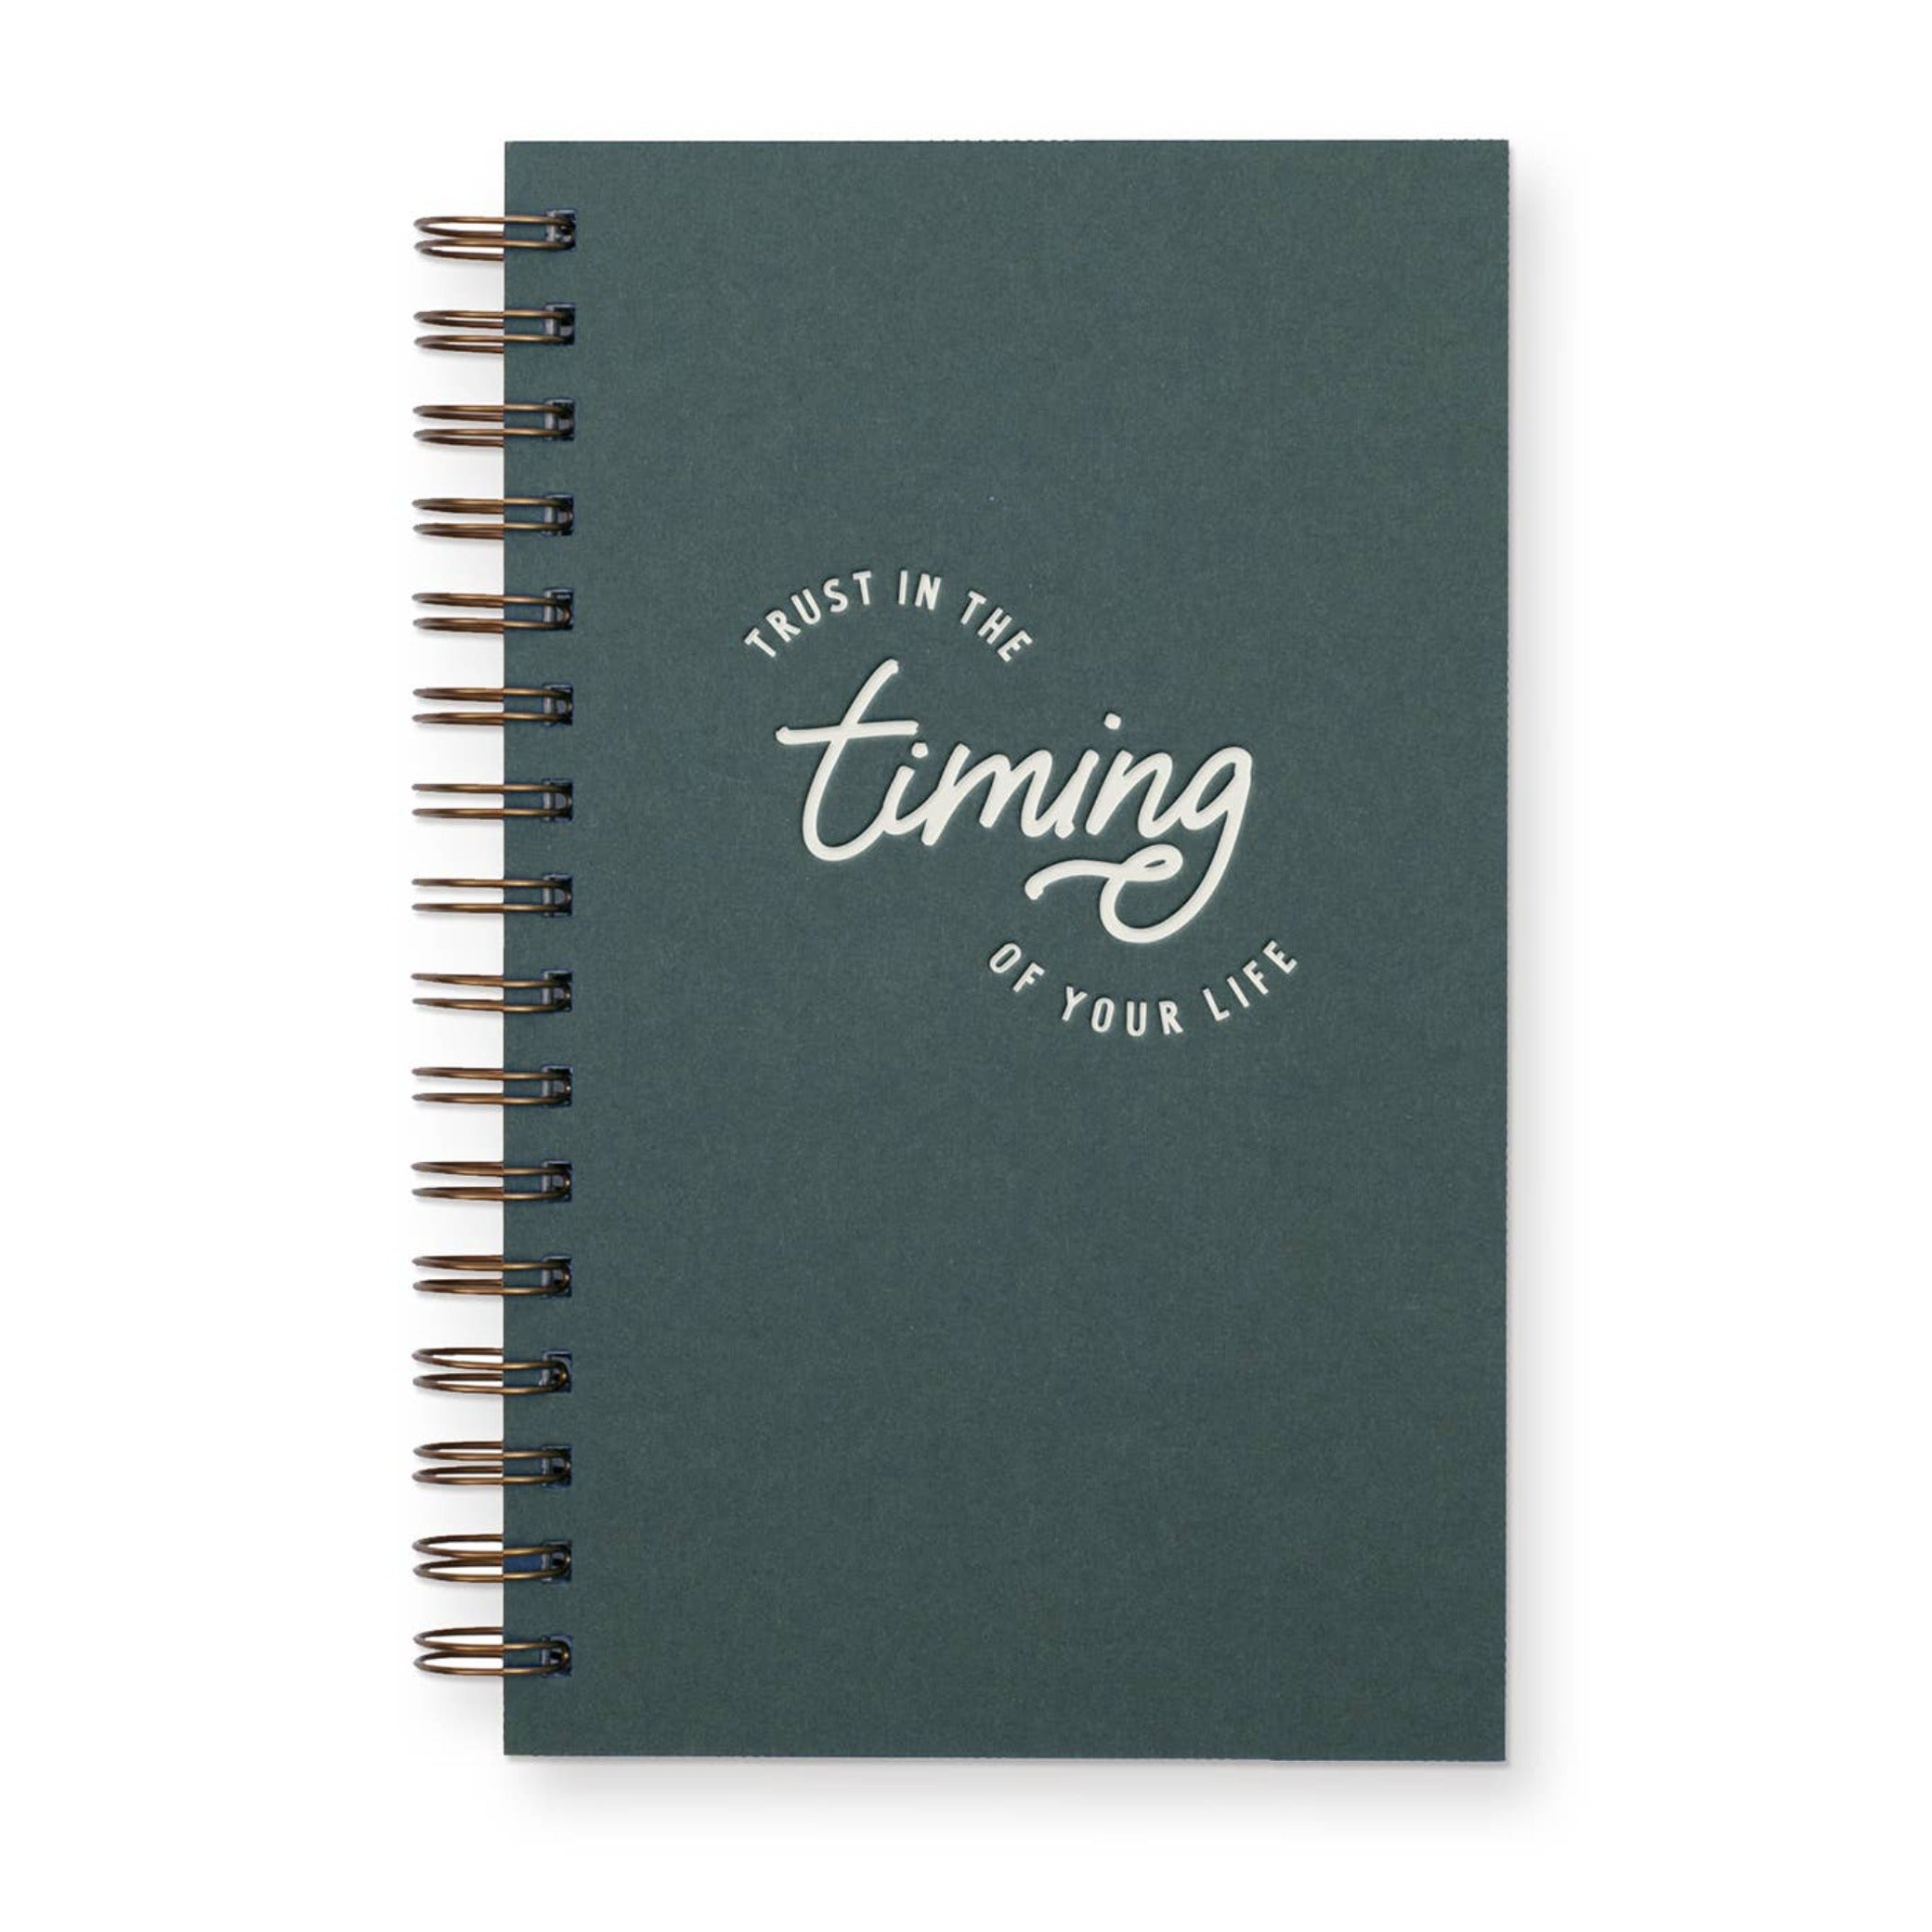 Trust in the Timing of Your life journal planner is pitched on a white background, 